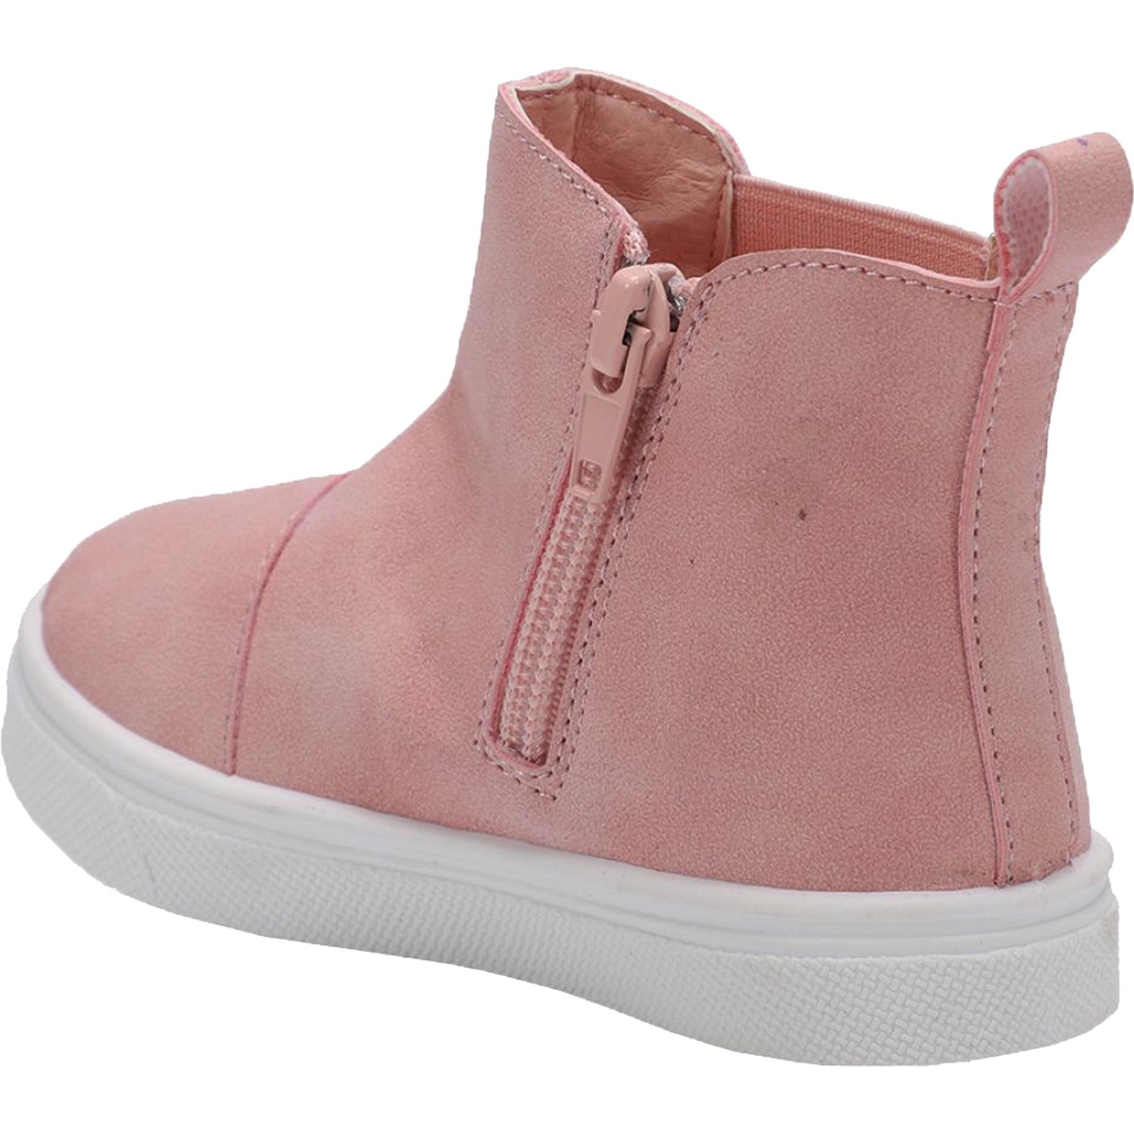 Oomphies Toddler Girls Colette Boots - Image 4 of 4